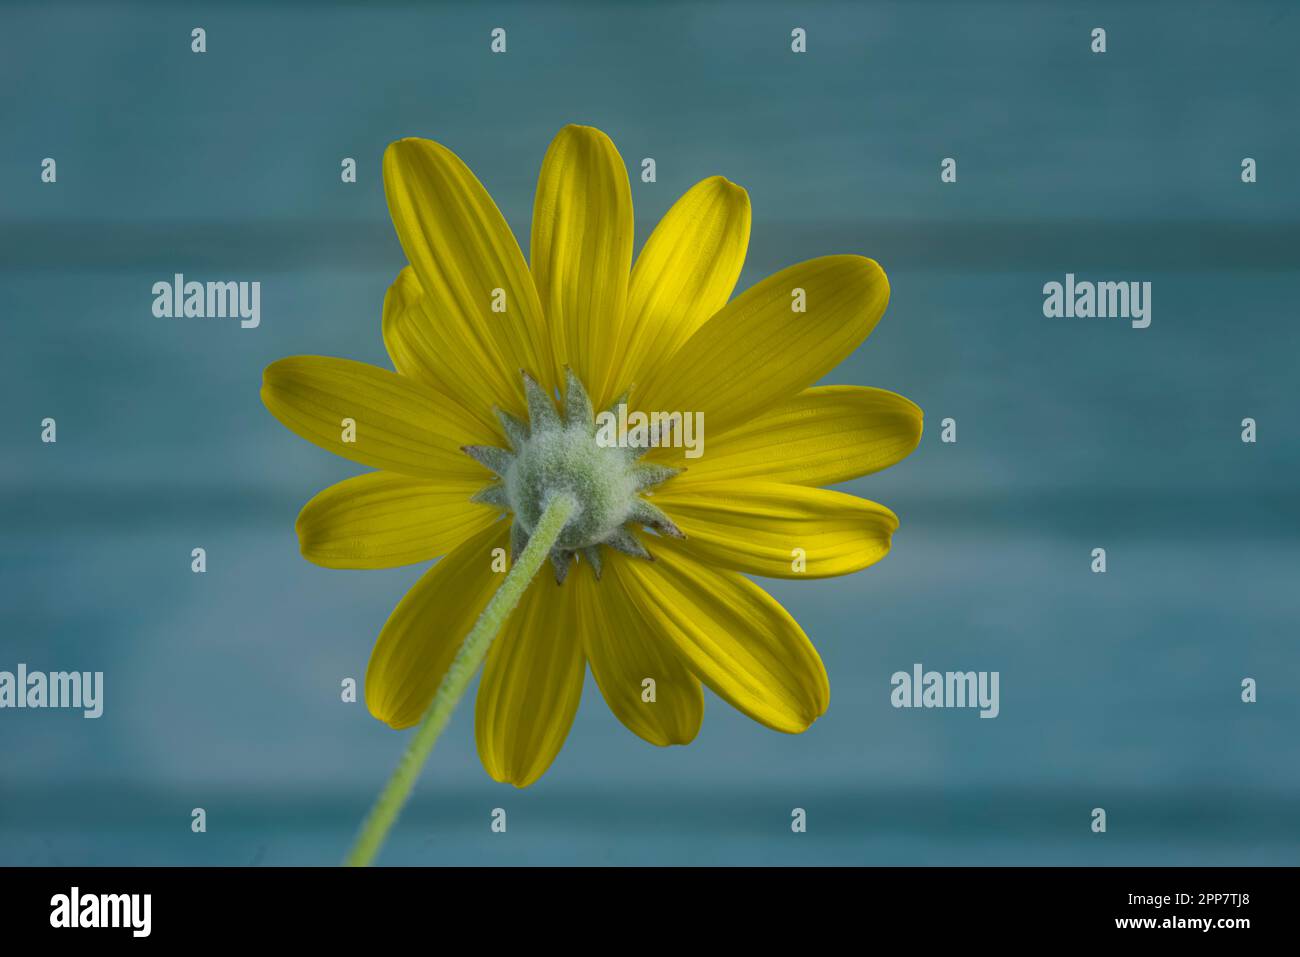 Yellow daisy flower (euryops pectinatus) view from behind, blurred light blue wood background Stock Photo